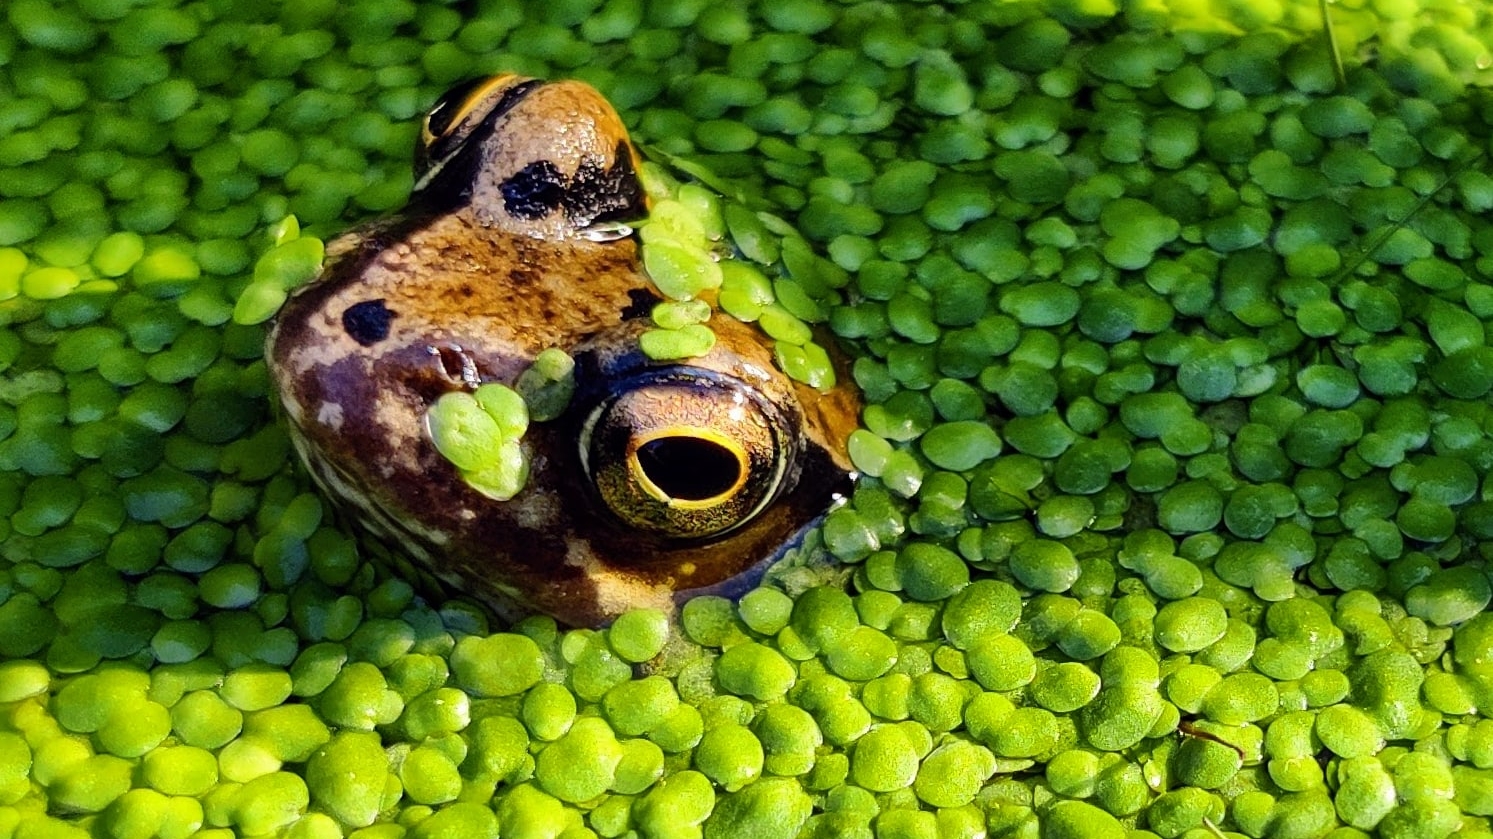 A frog peering out from under a weed-covered pond